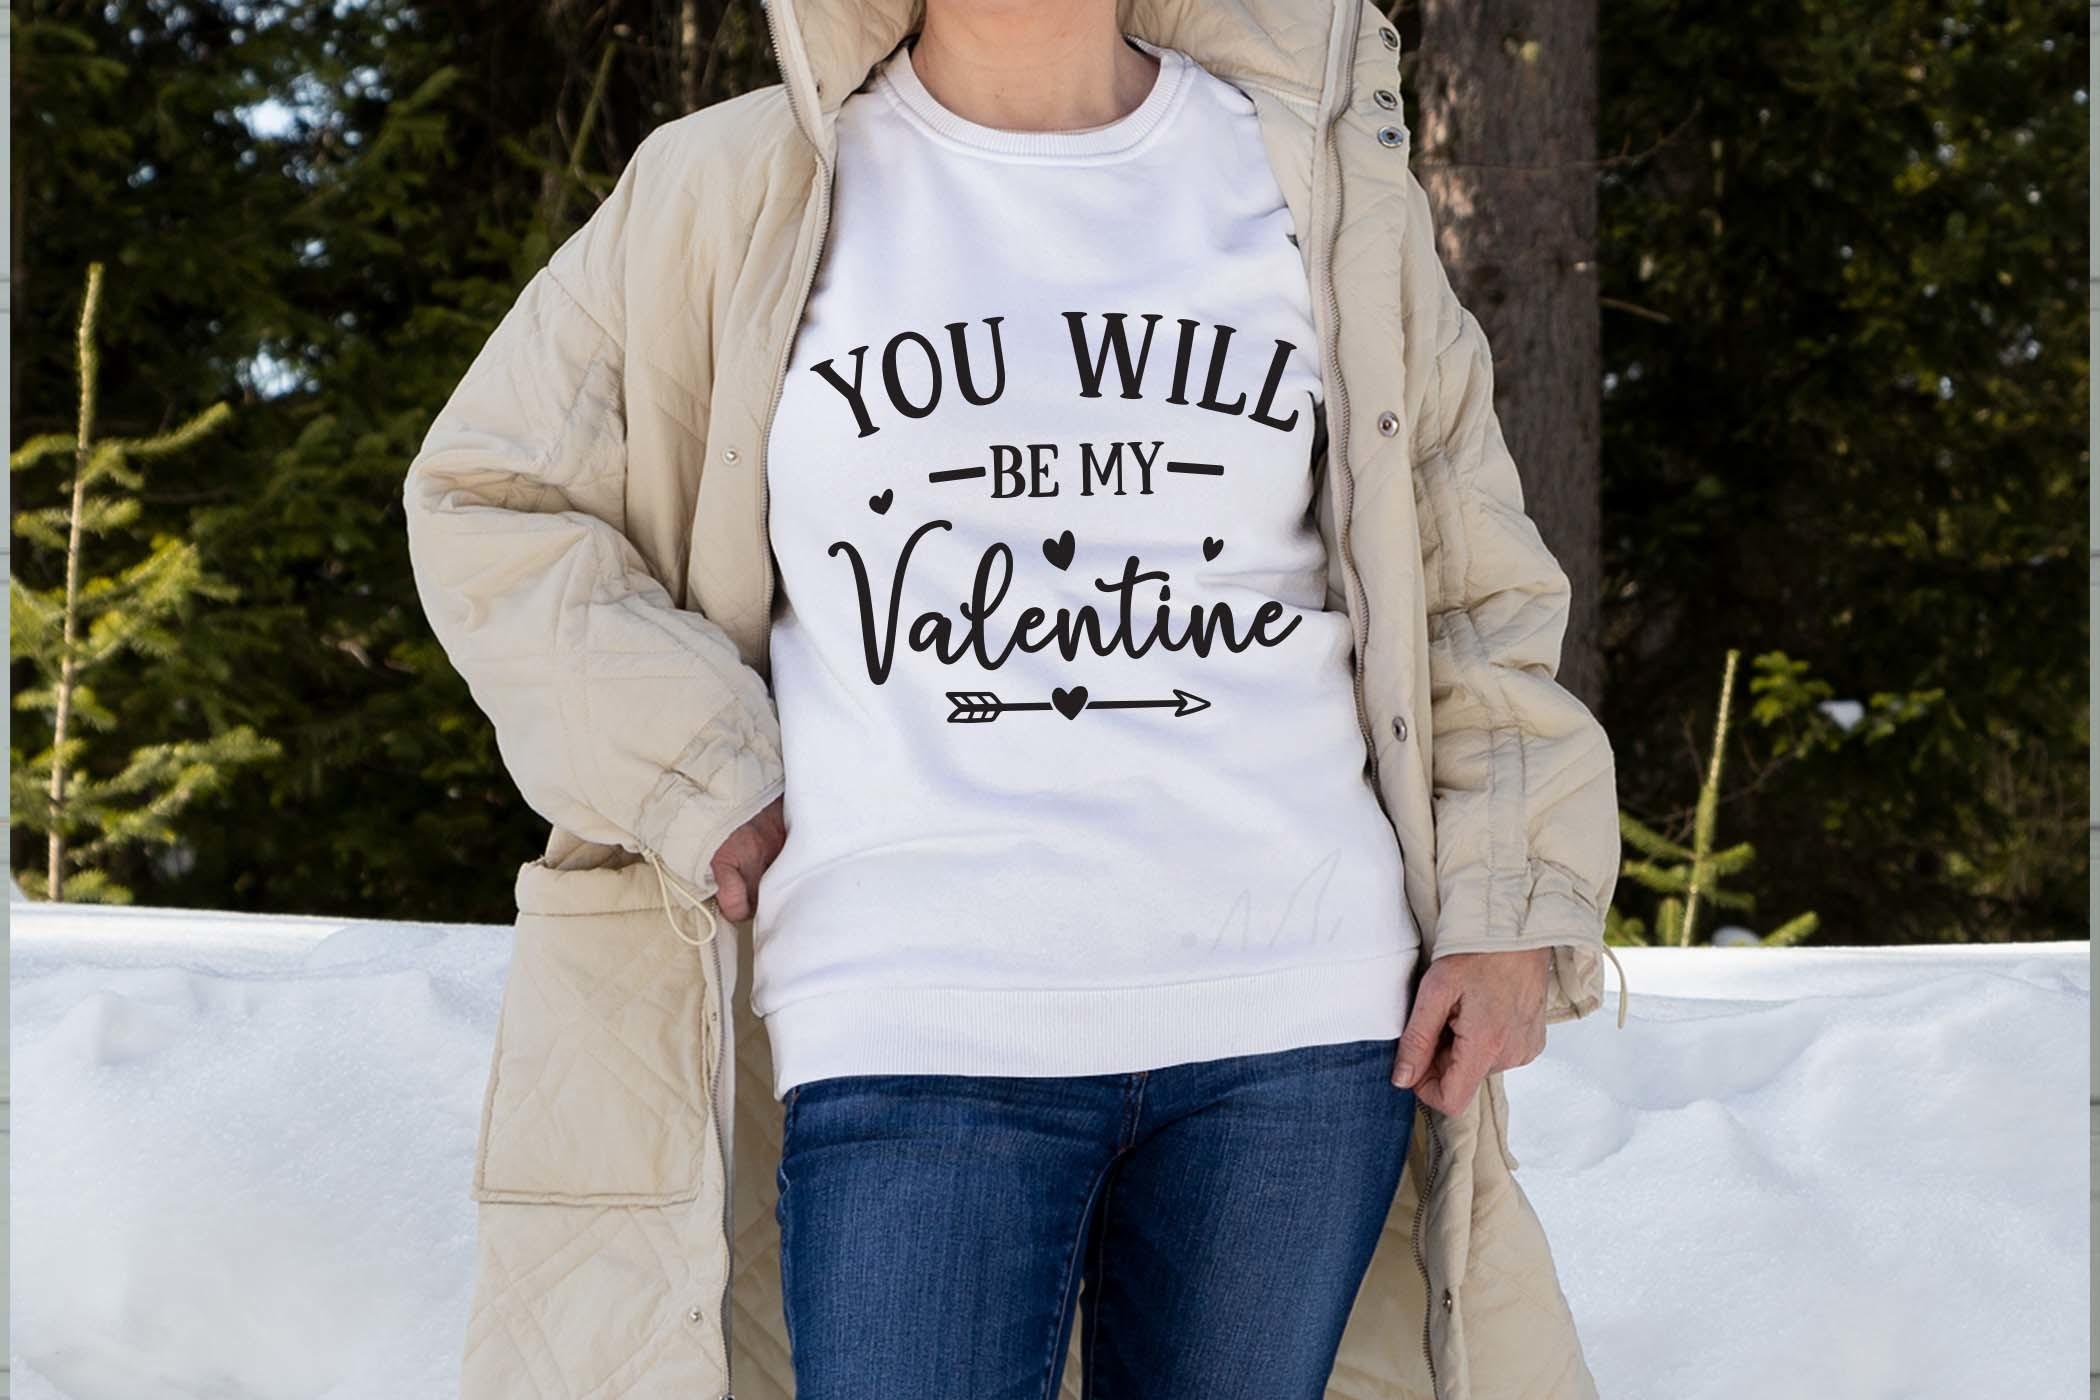 You Will Be My Valentine Svg